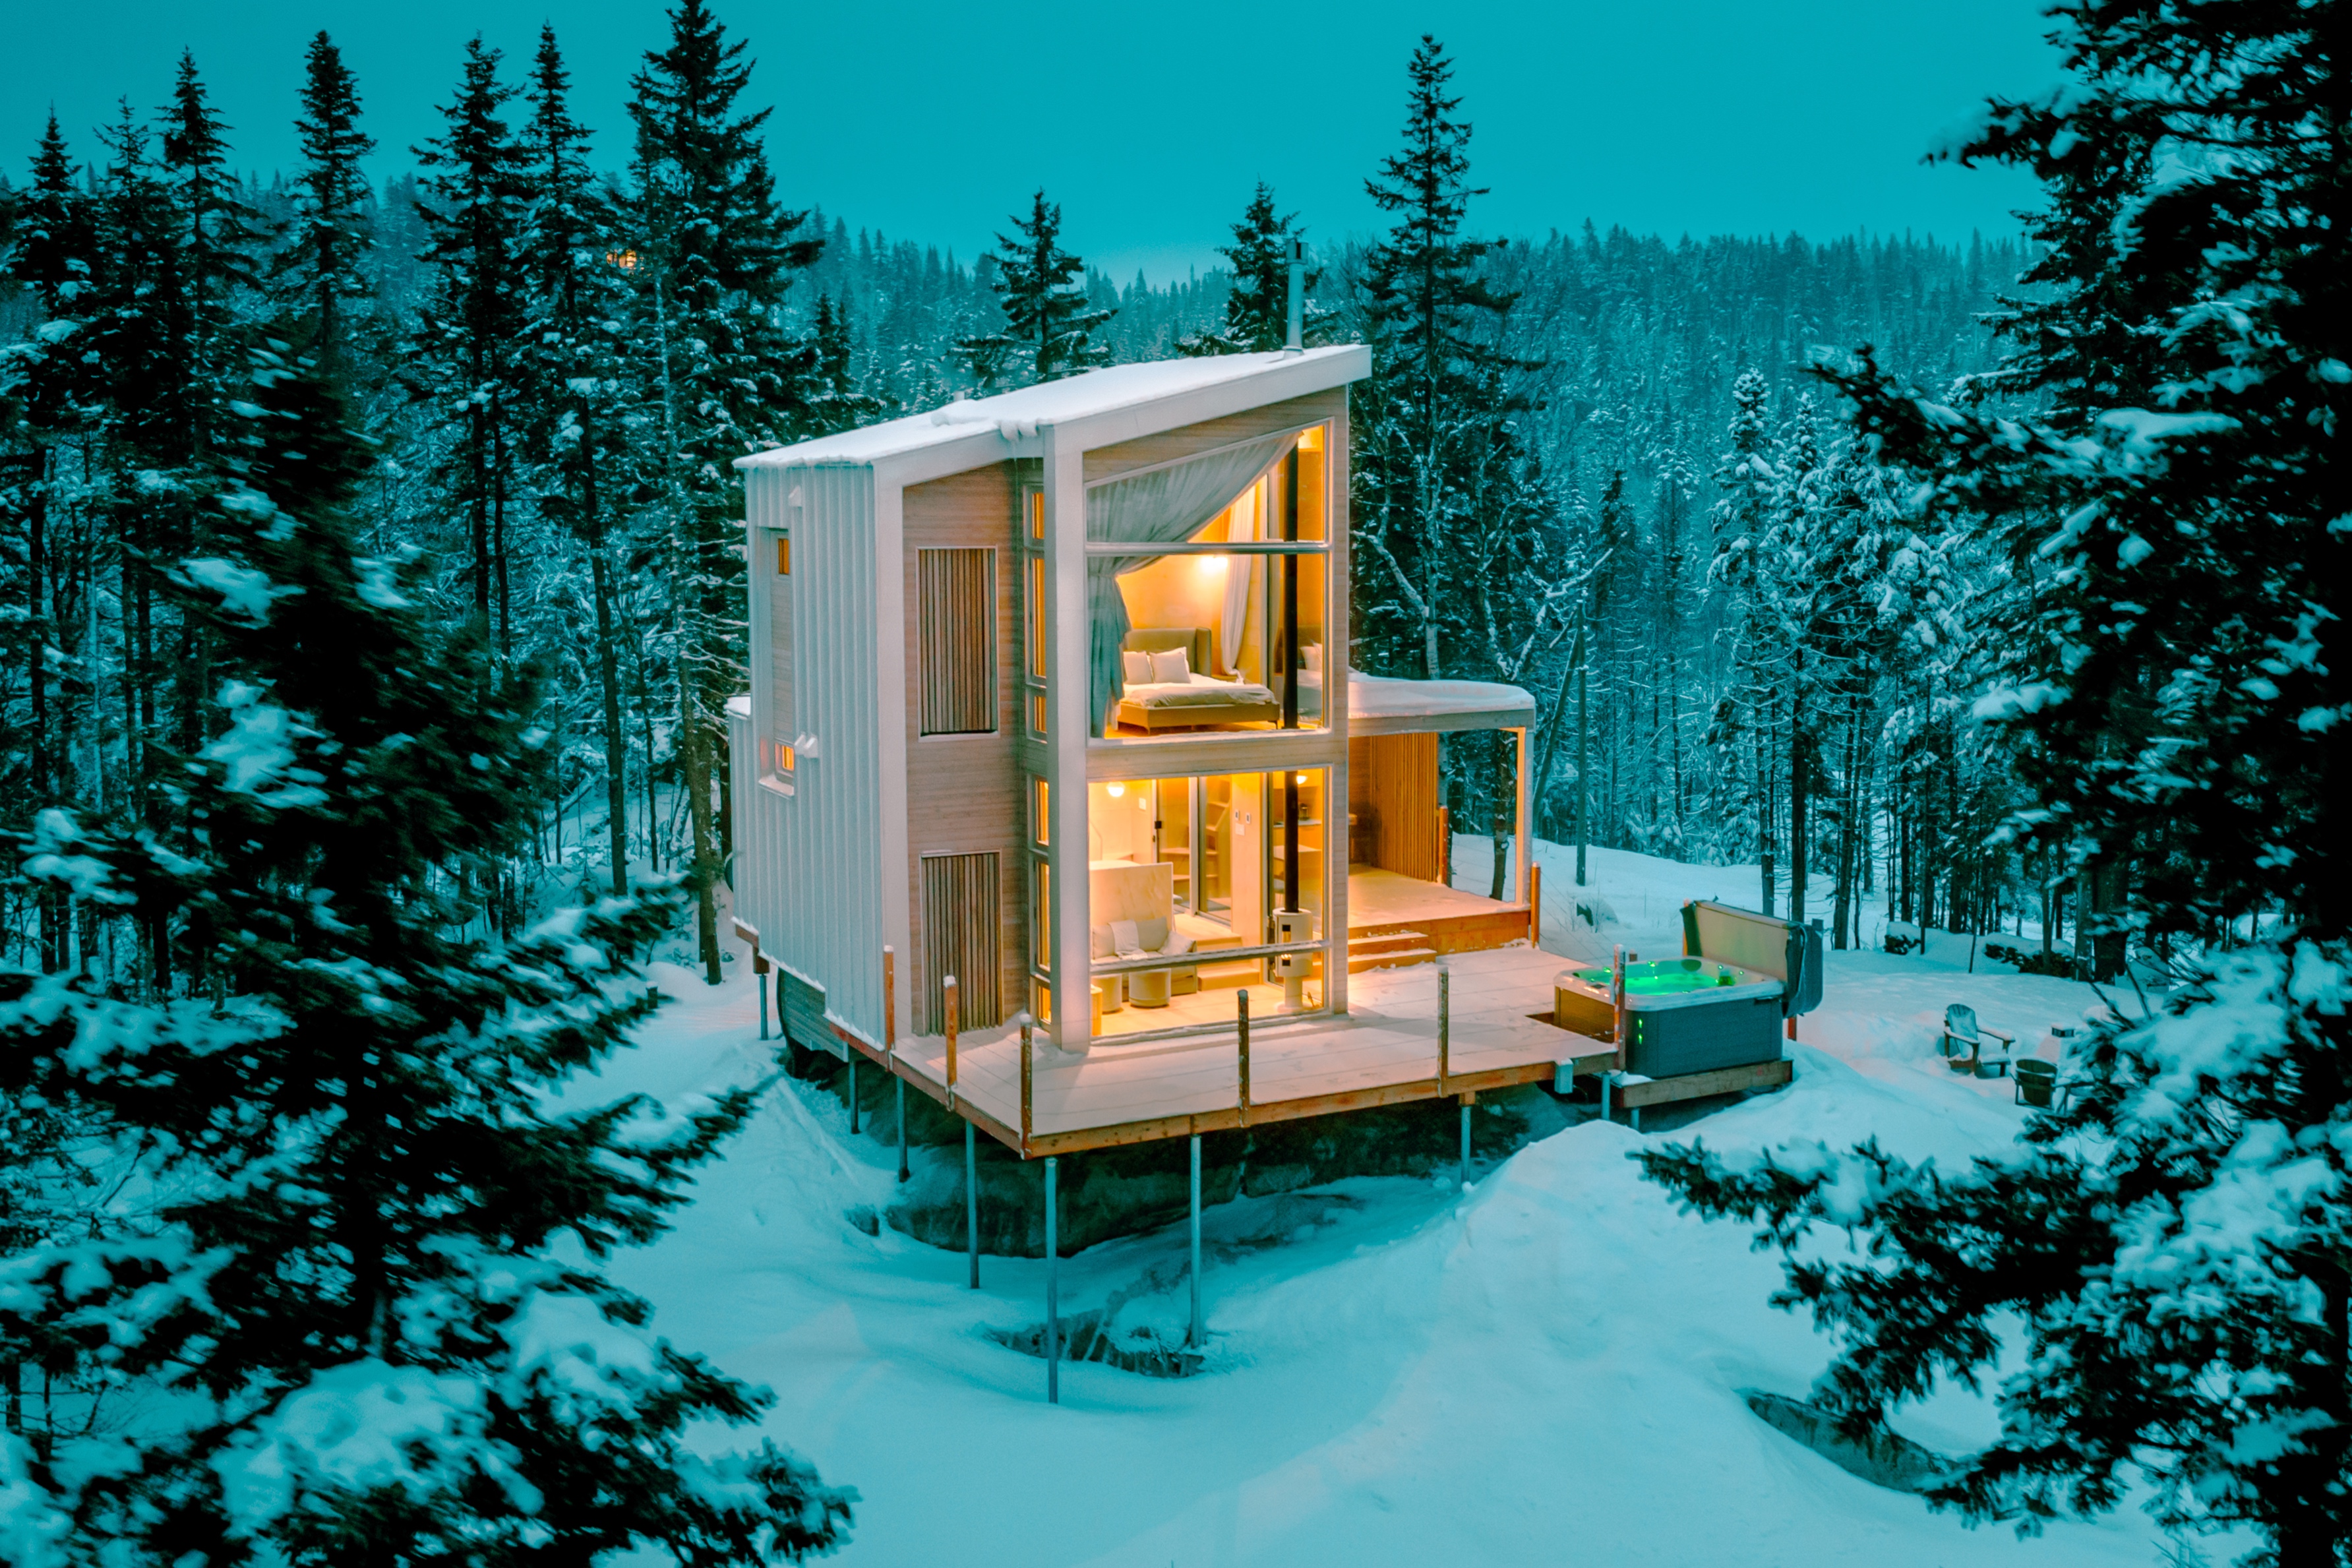 An open-concept home at twilight during winter.